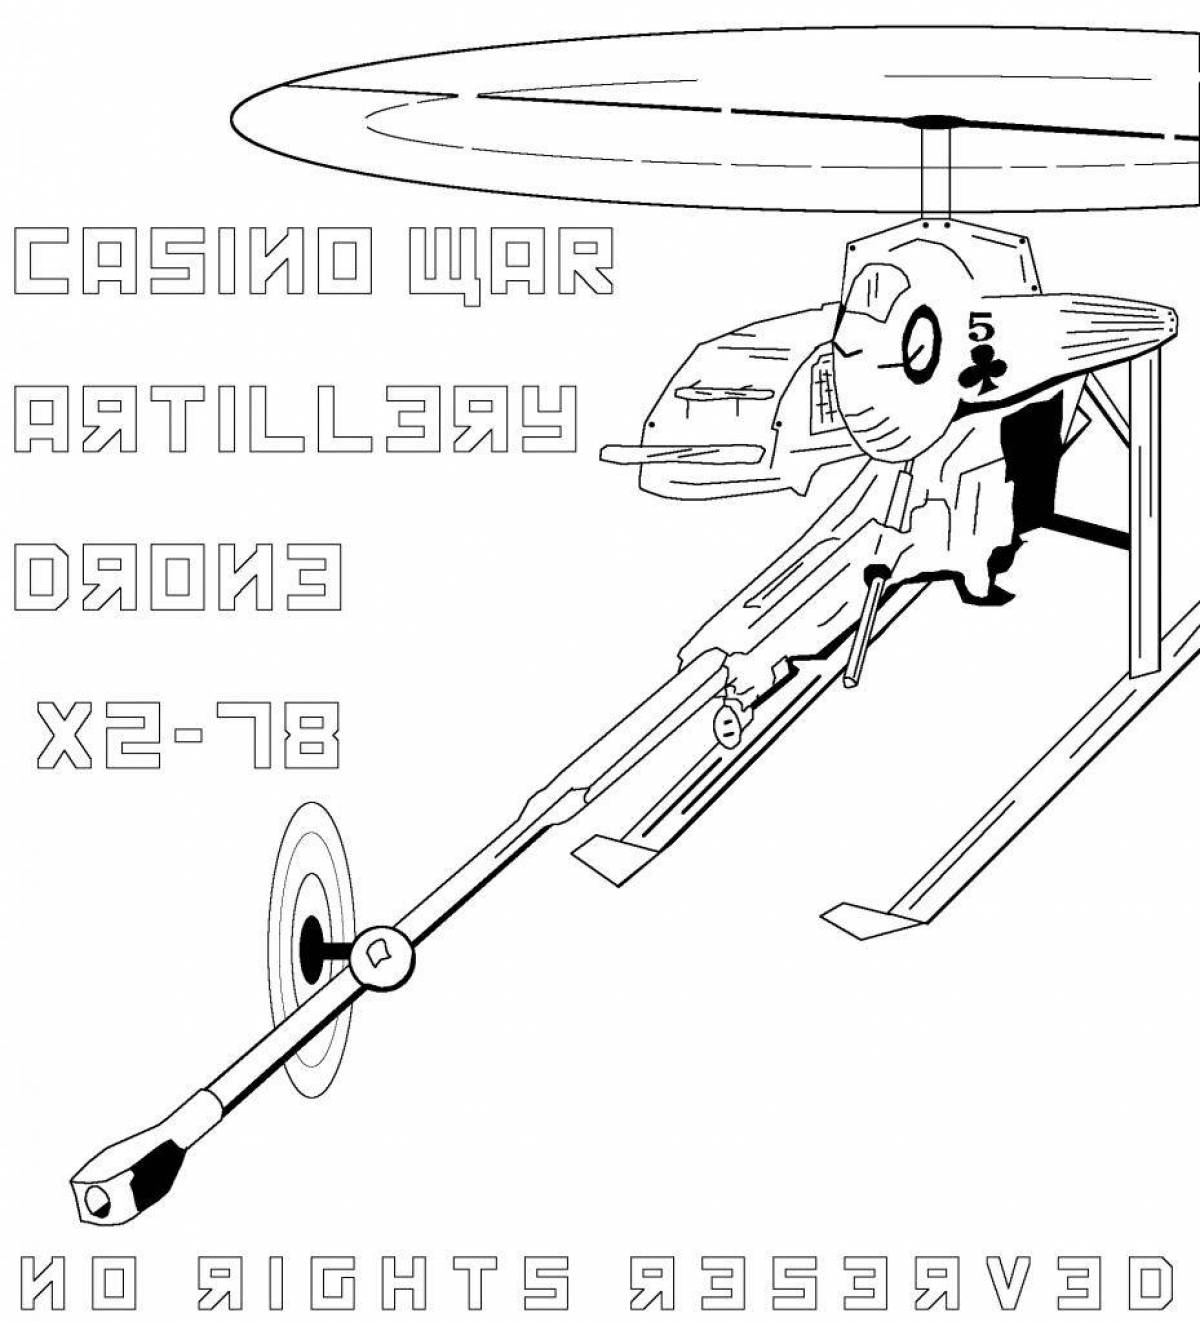 Awesome drone coloring page